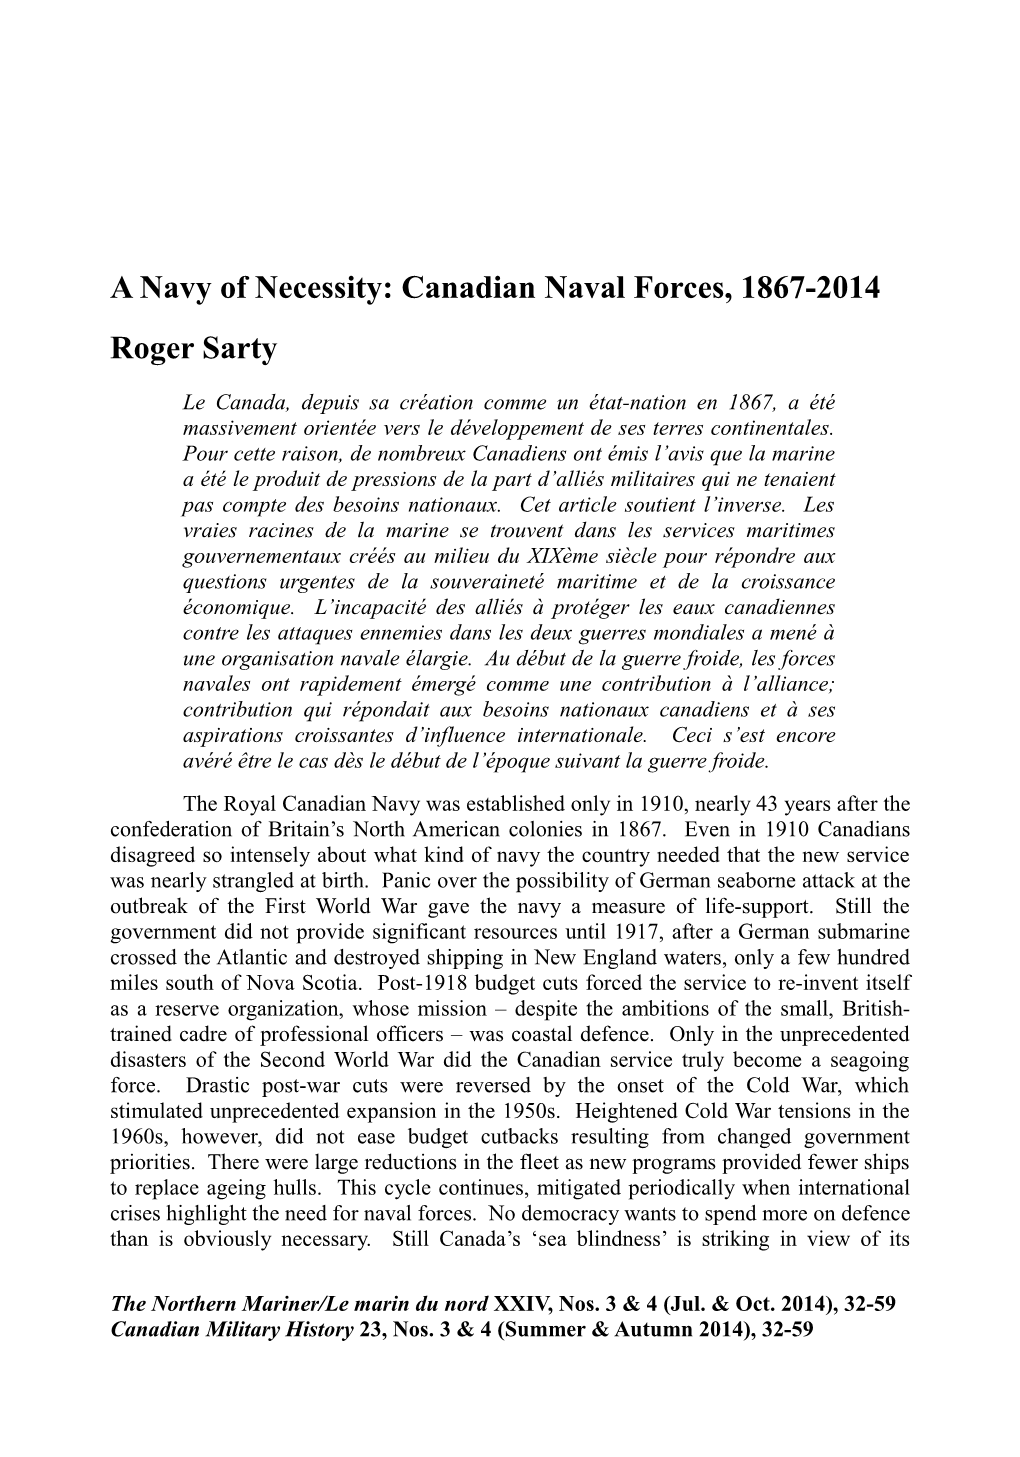 A Navy of Necessity: Canadian Naval Forces, 1867-2014 Roger Sarty